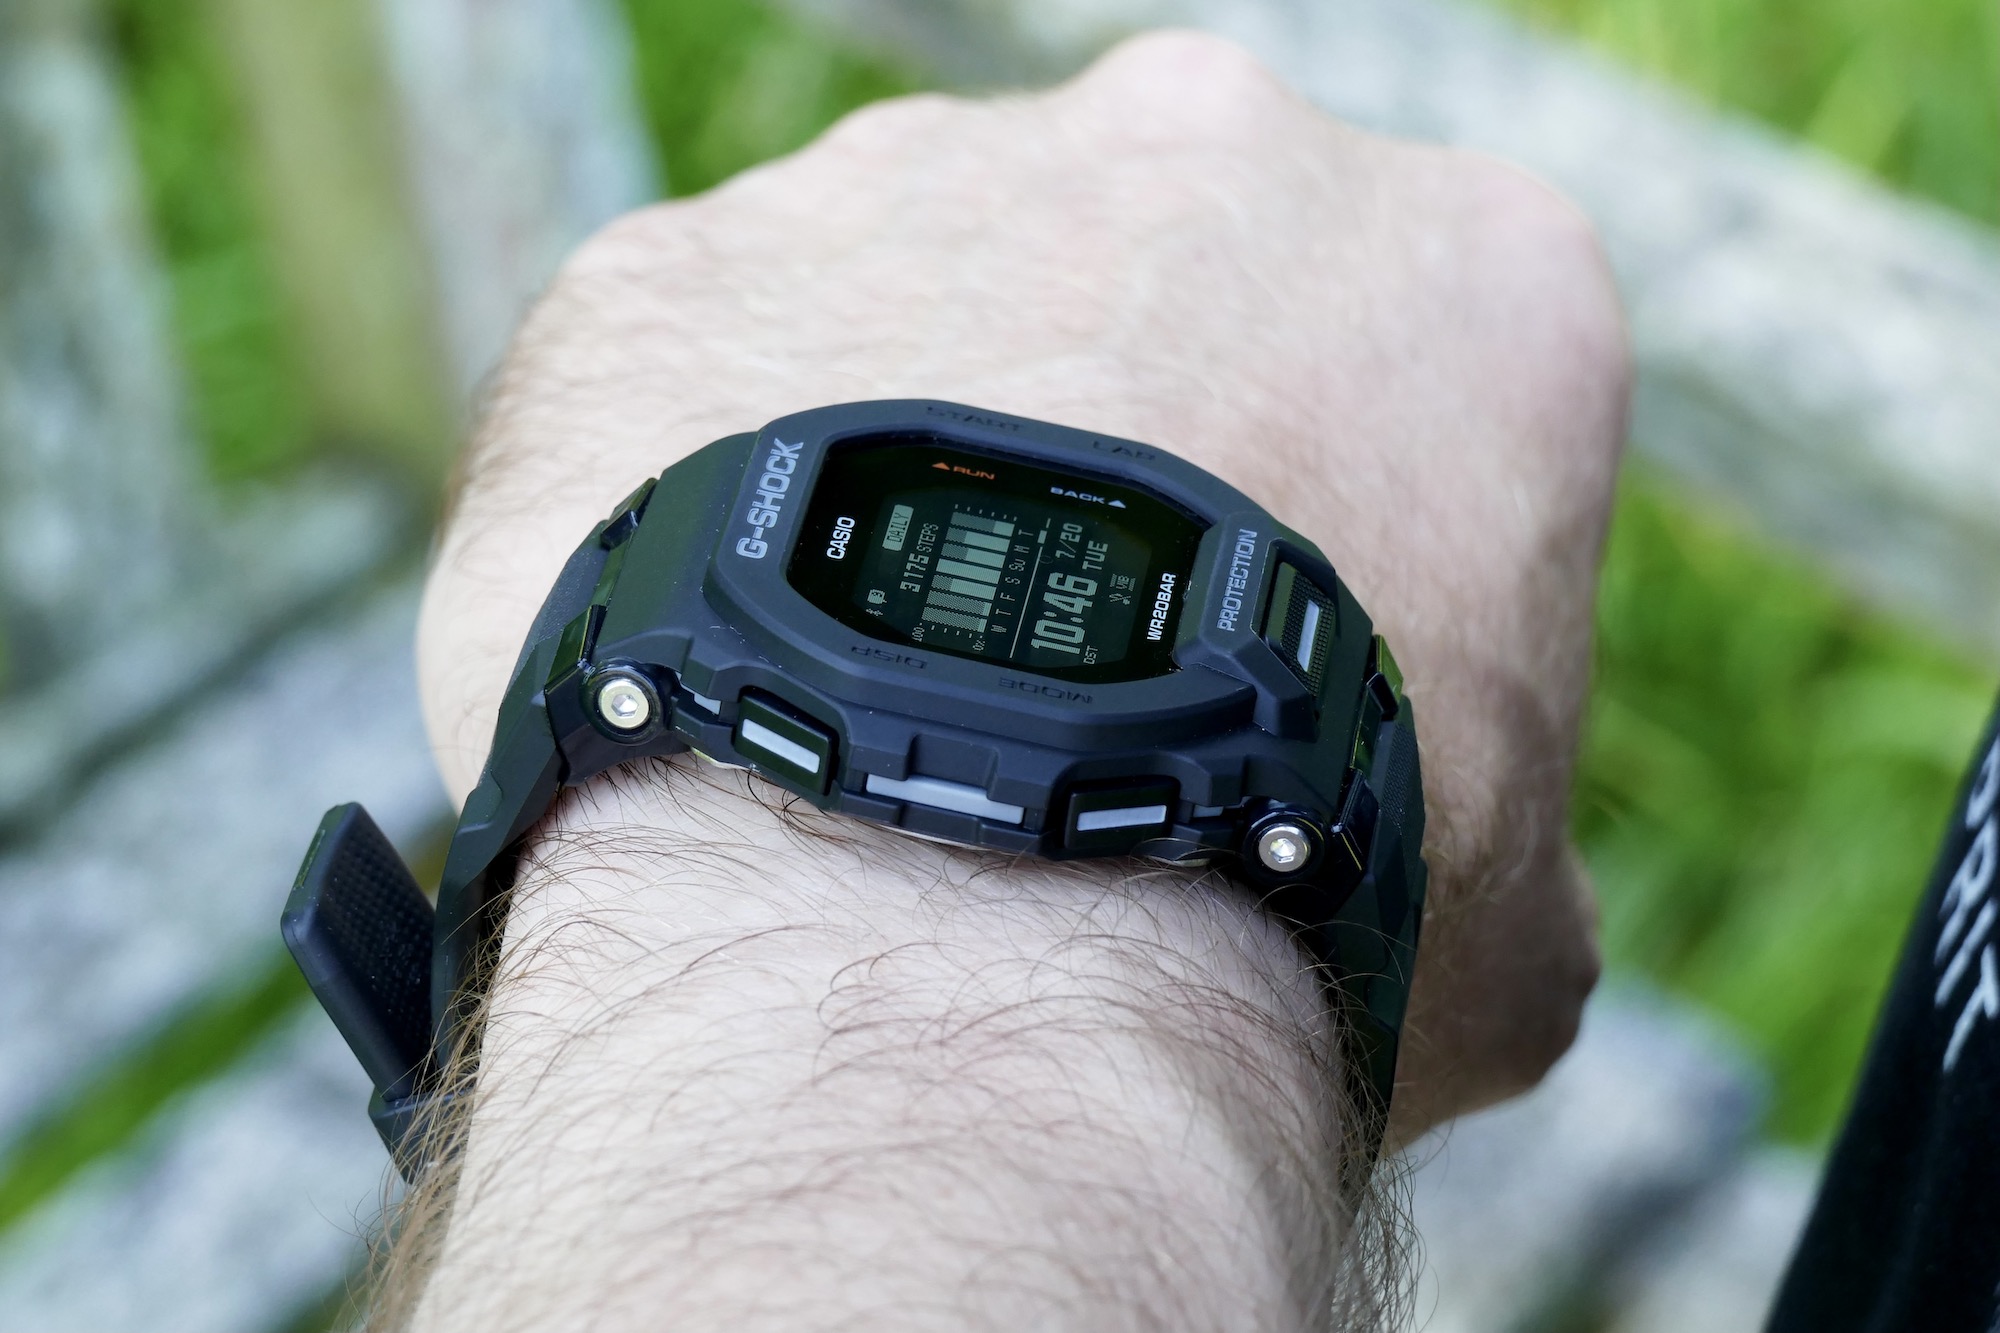 Casio G-Shock GBD-200 Review: Perfectly Balanced | Digital Trends